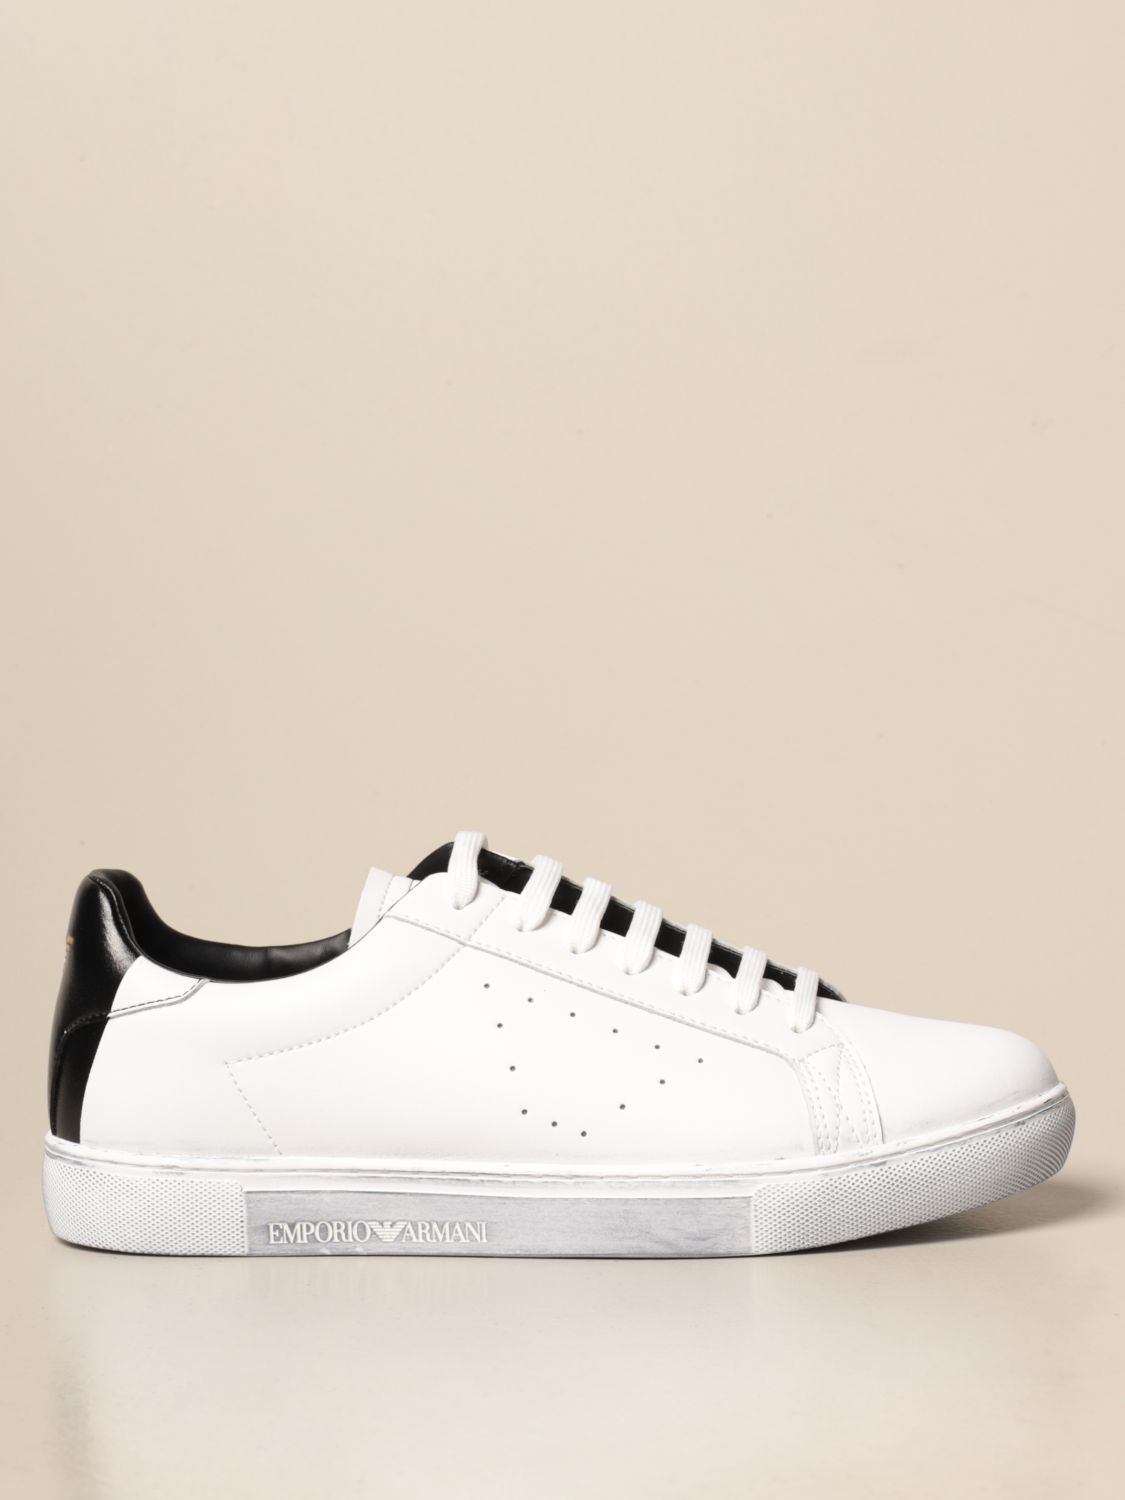 Stumble Out of date balcony EMPORIO ARMANI: sneakers in leather - White | Emporio Armani sneakers  X4X316 XM500 online on GIGLIO.COM